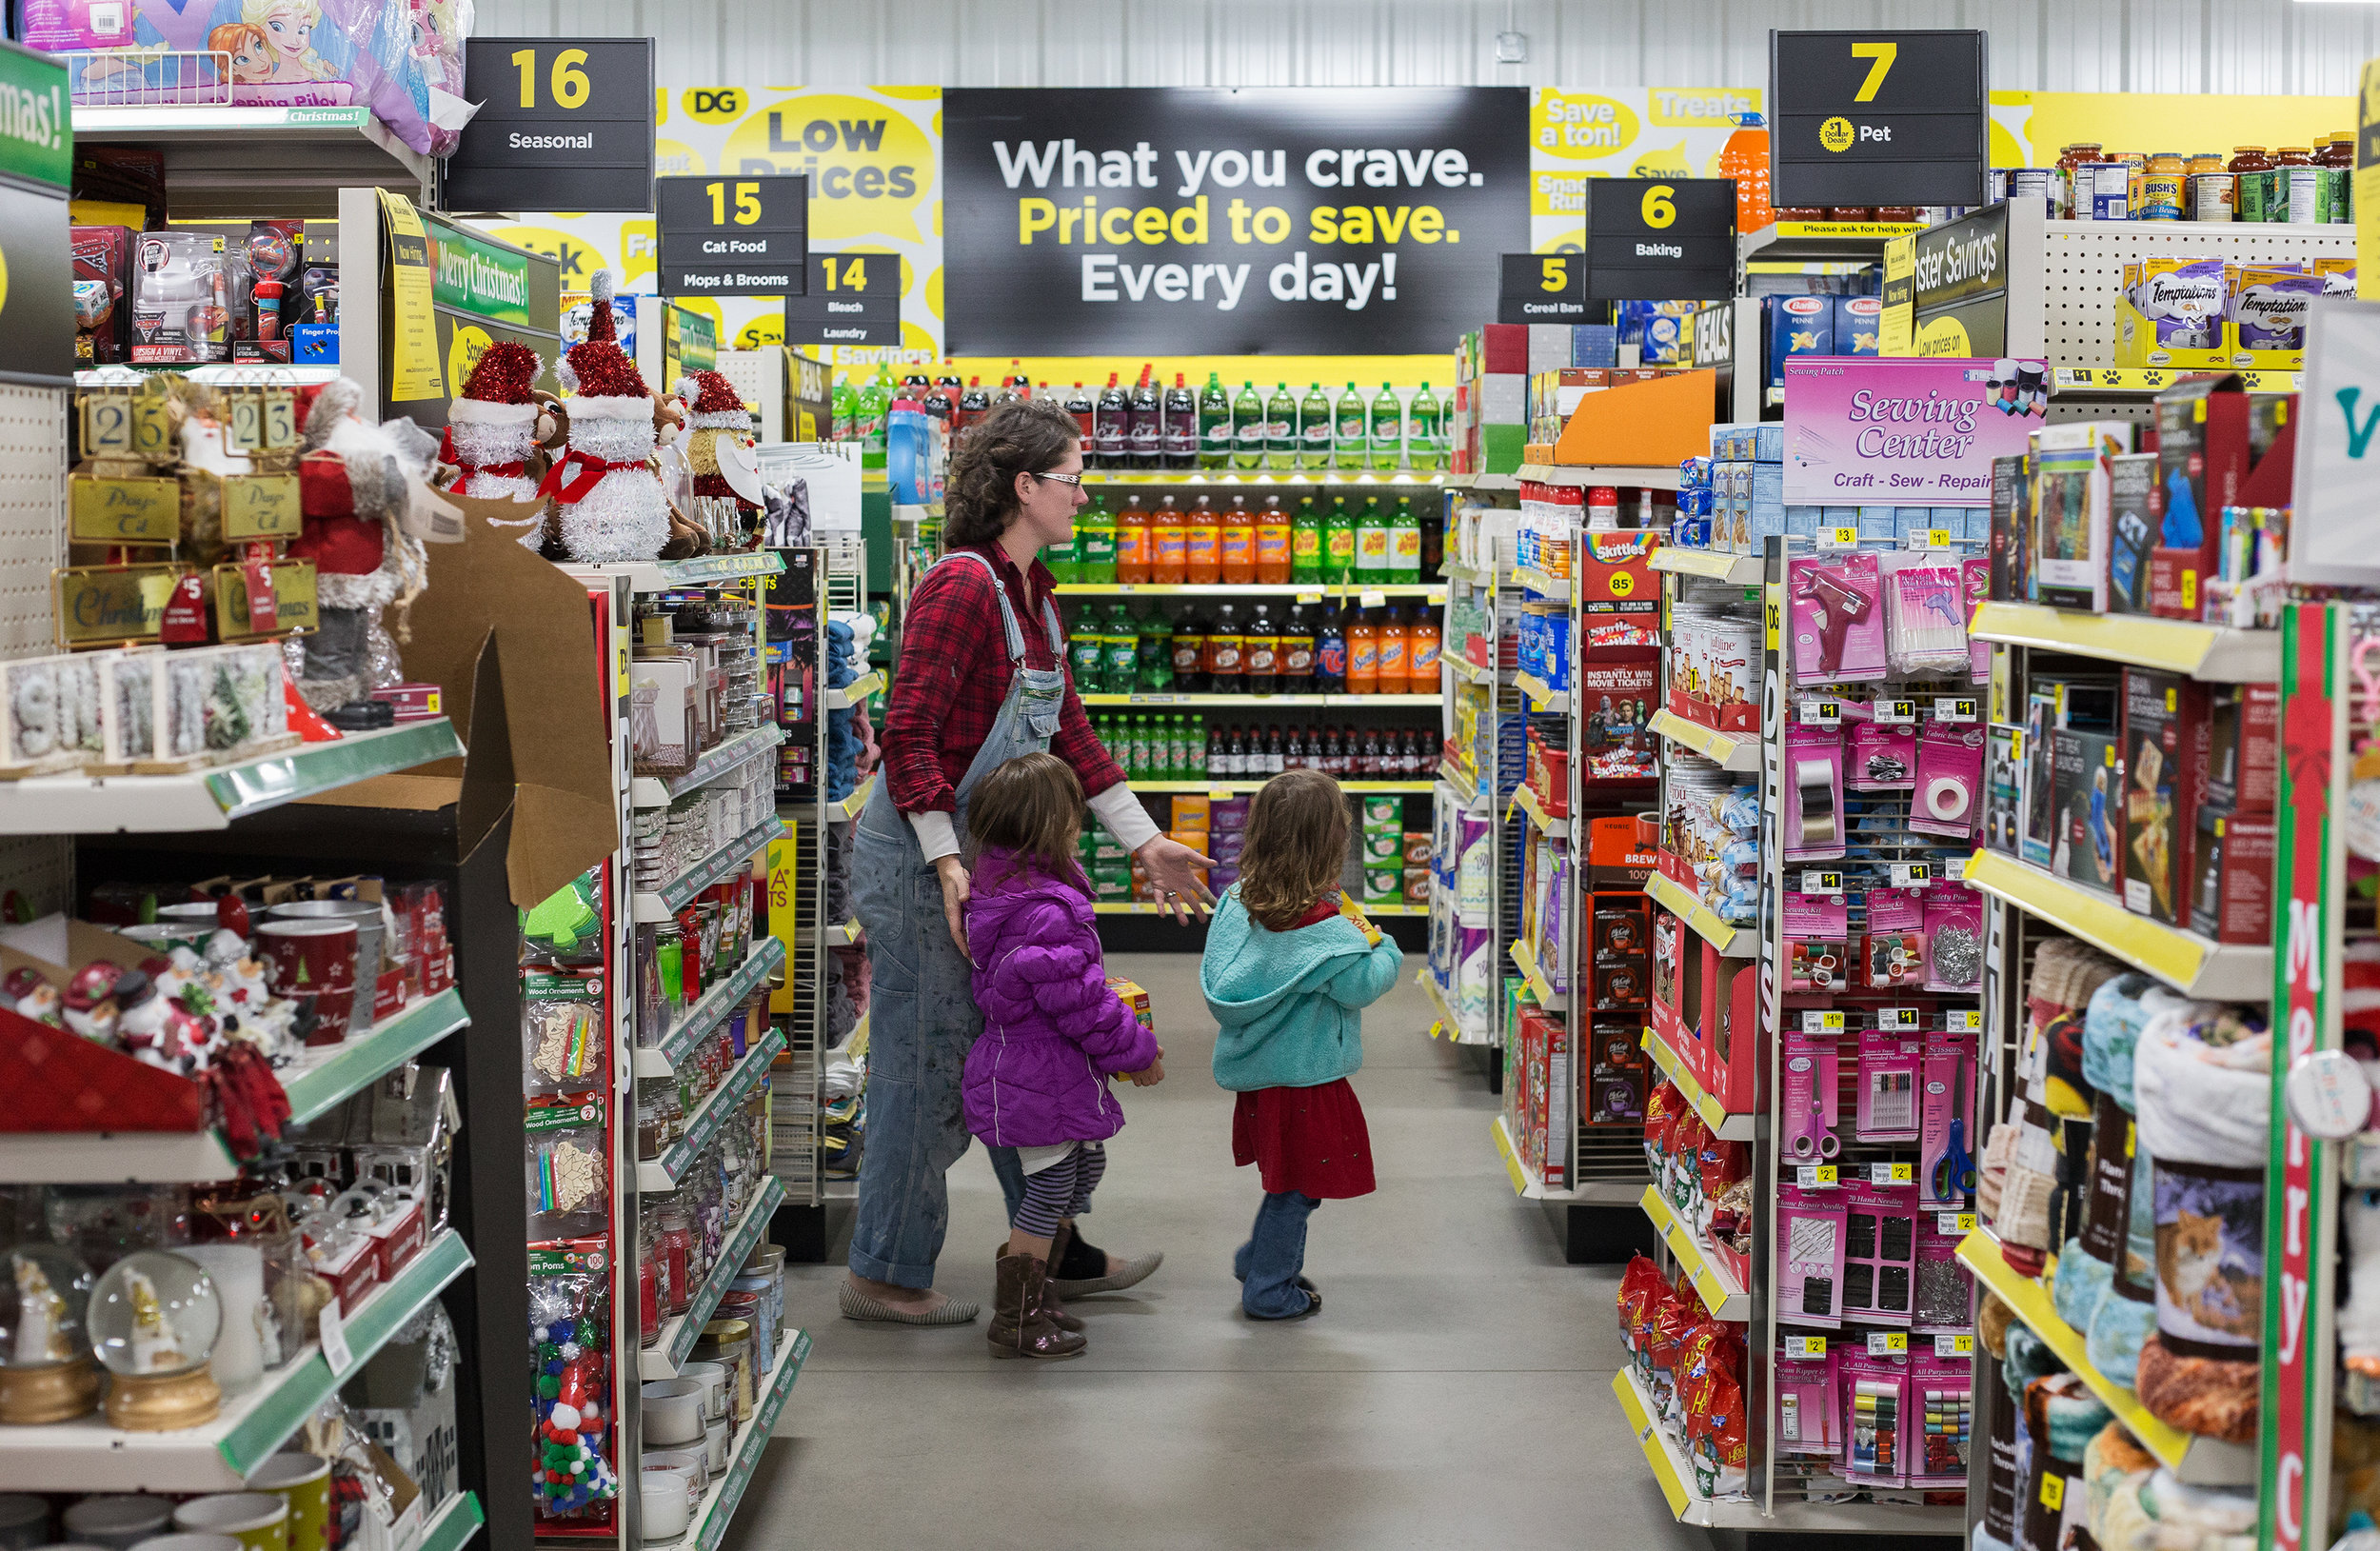  Local business owner Leah O’Neill, left, shops for cat food with her daughters Elizabeth and Emily O’Neill, 4, all of Evensville at Dollar General in Evensville, Tenn. Thursday, Nov. 16 2017.  